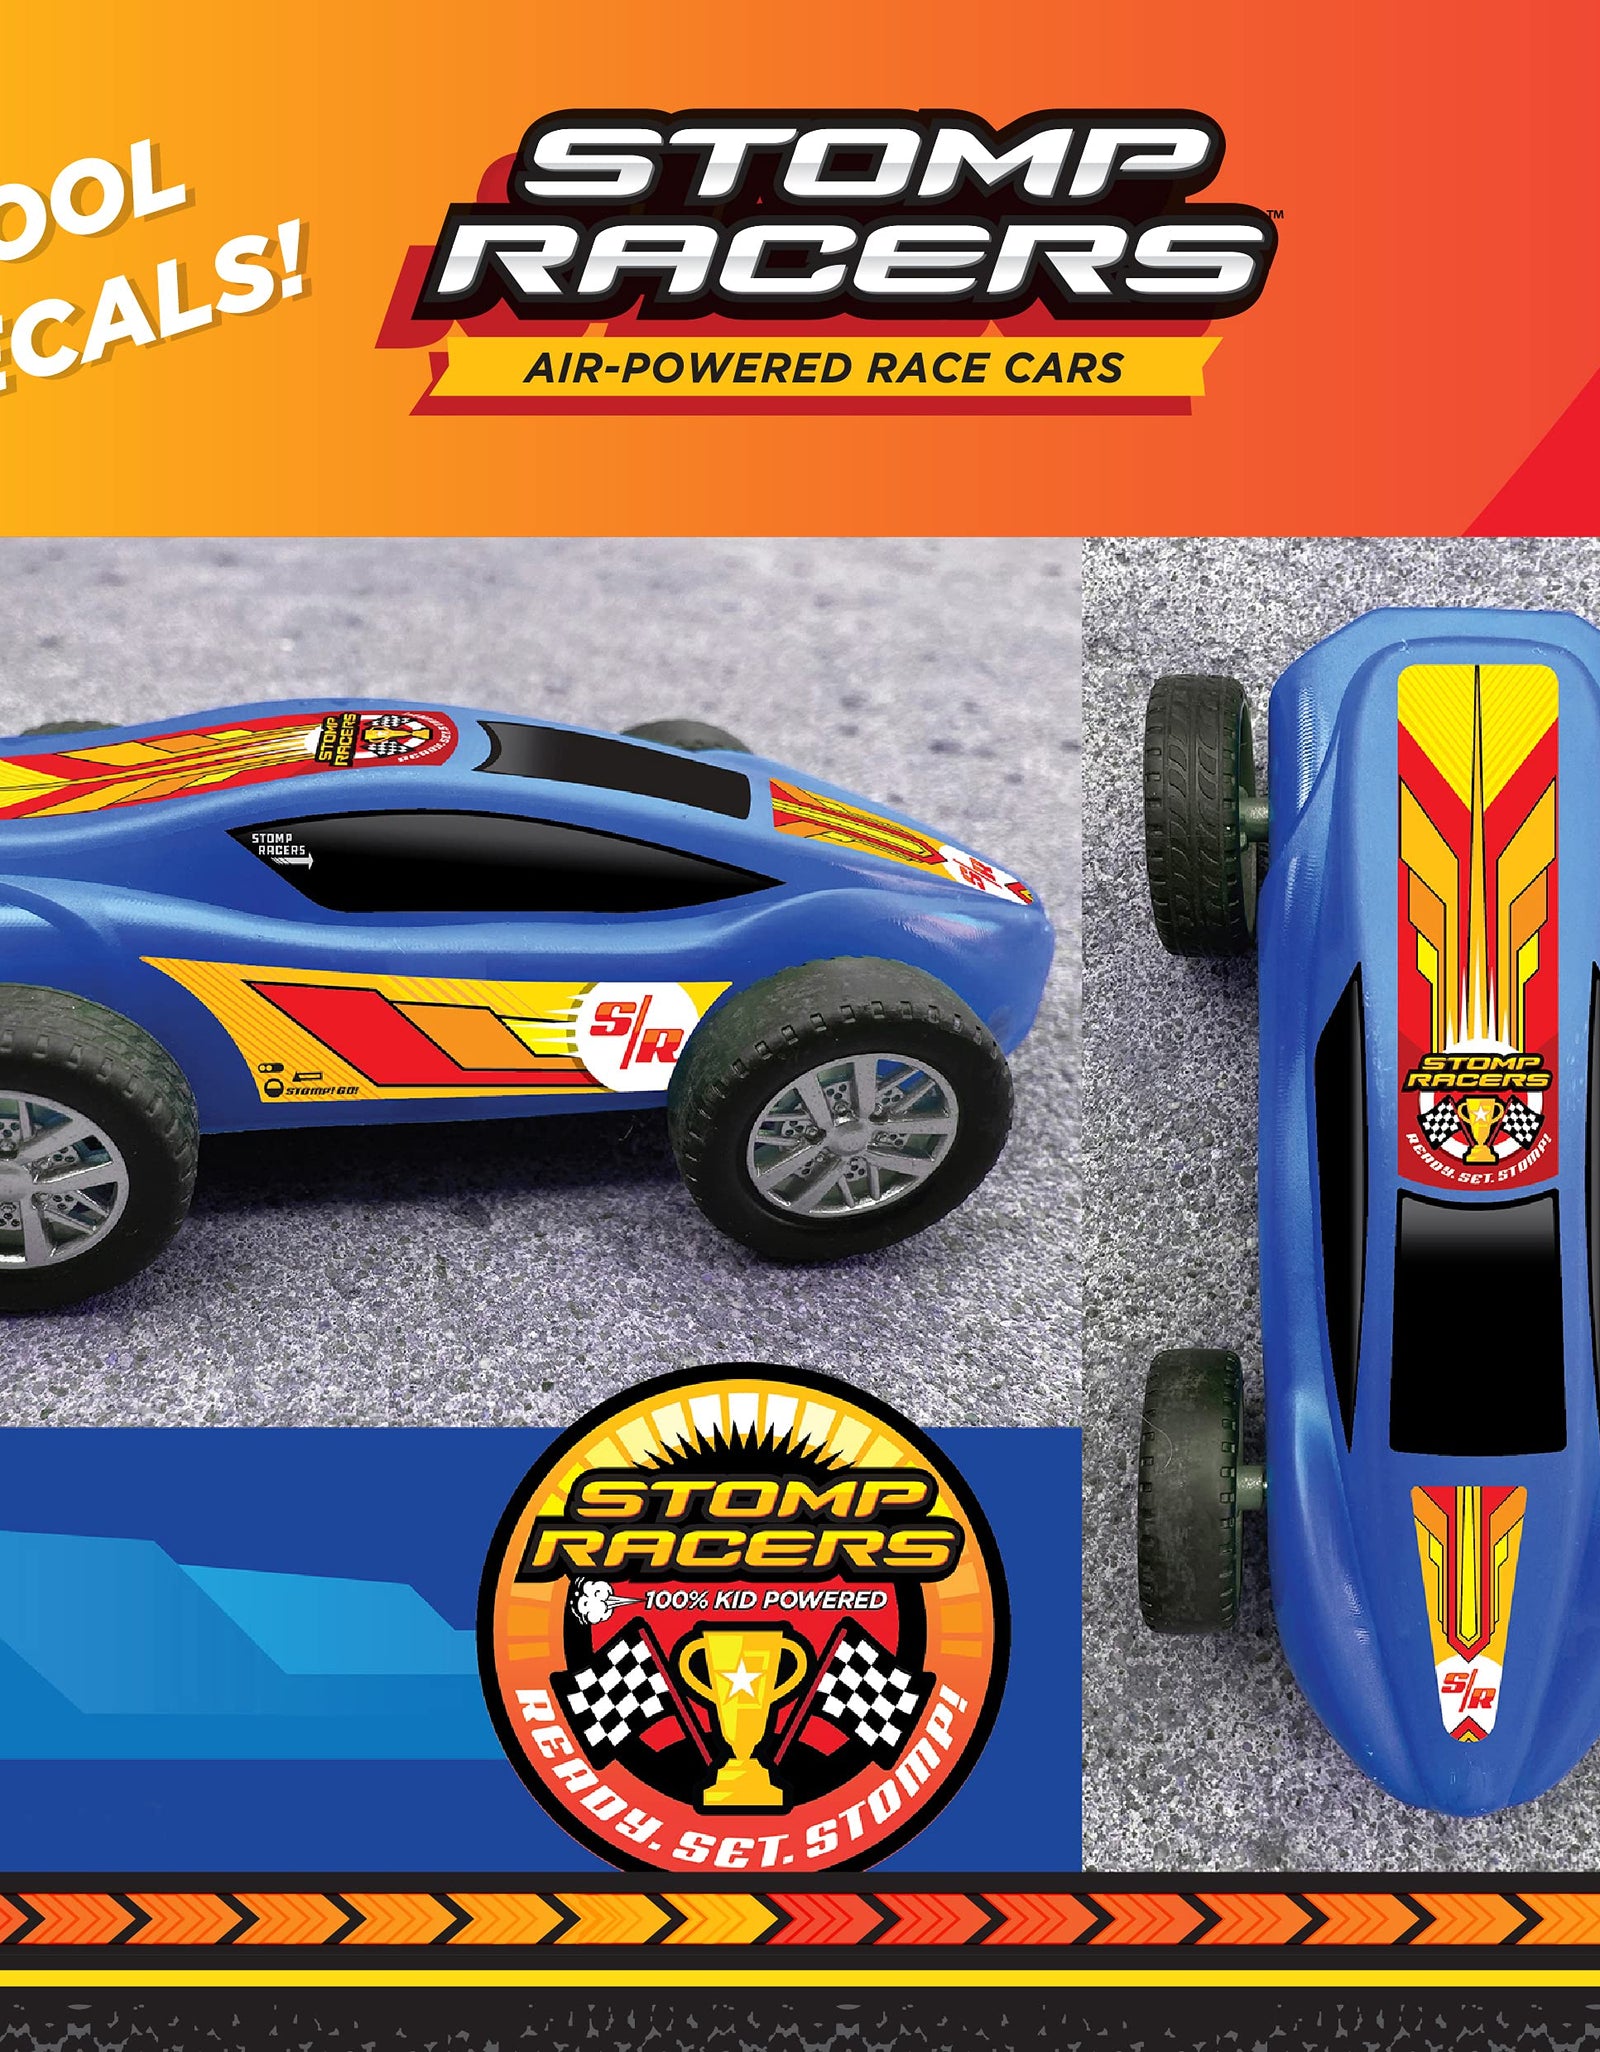 New Stomp Rocket Dueling Stomp Racers, 2 Toy Car Launchers and 2 Air Powered Cars with Ramp and Finish Line. Great for Outdoor and Indoor Play, STEM Gifts for Boys and Girls -Ages 5, 6, 7, 8